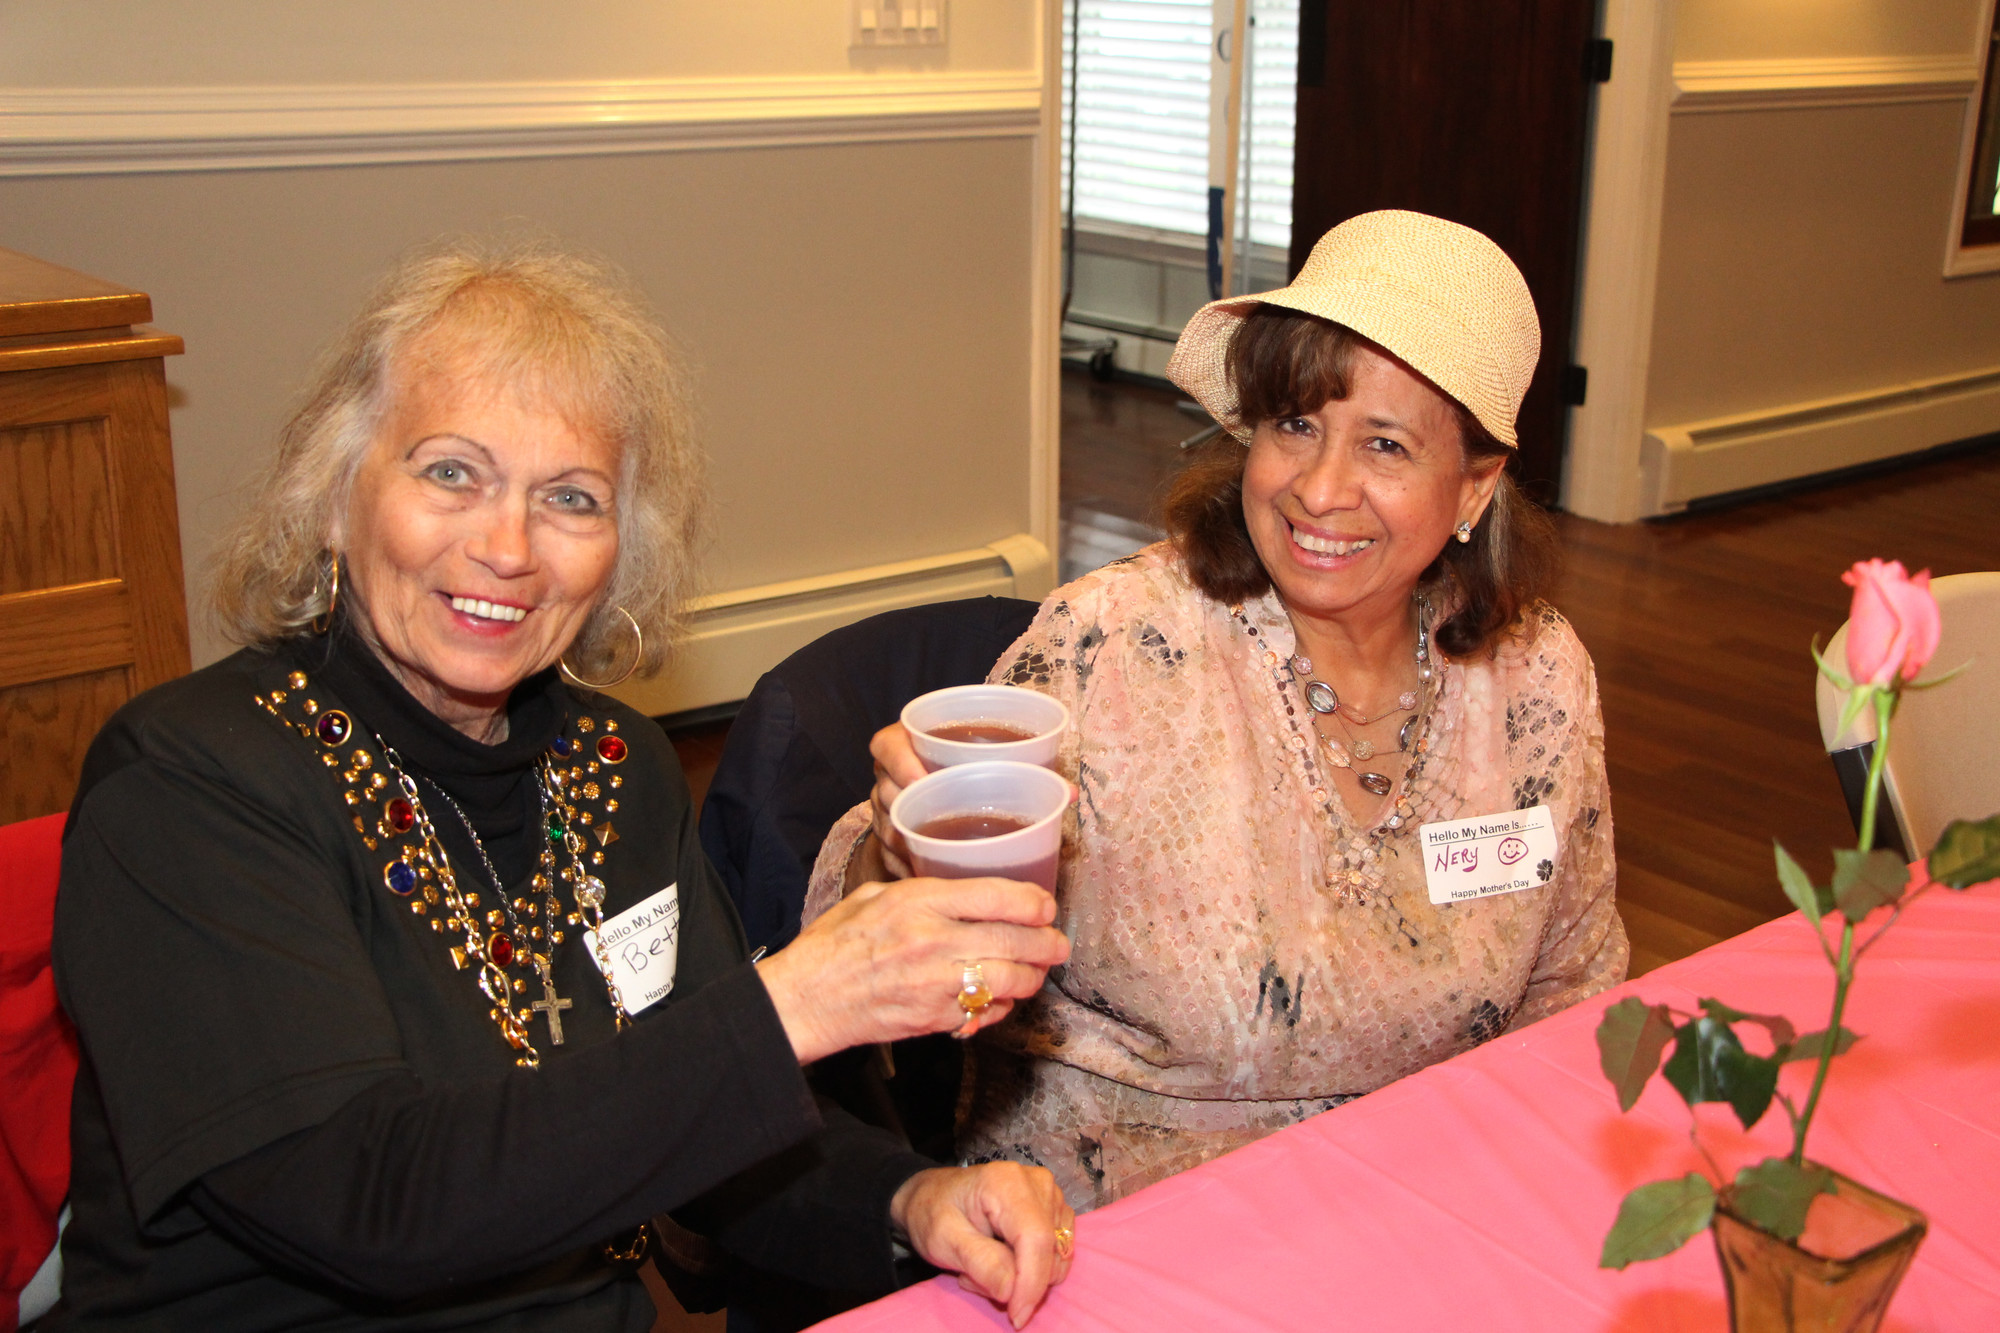 Betty Leionetti, left, and Nery Searra toasted for best wishes.